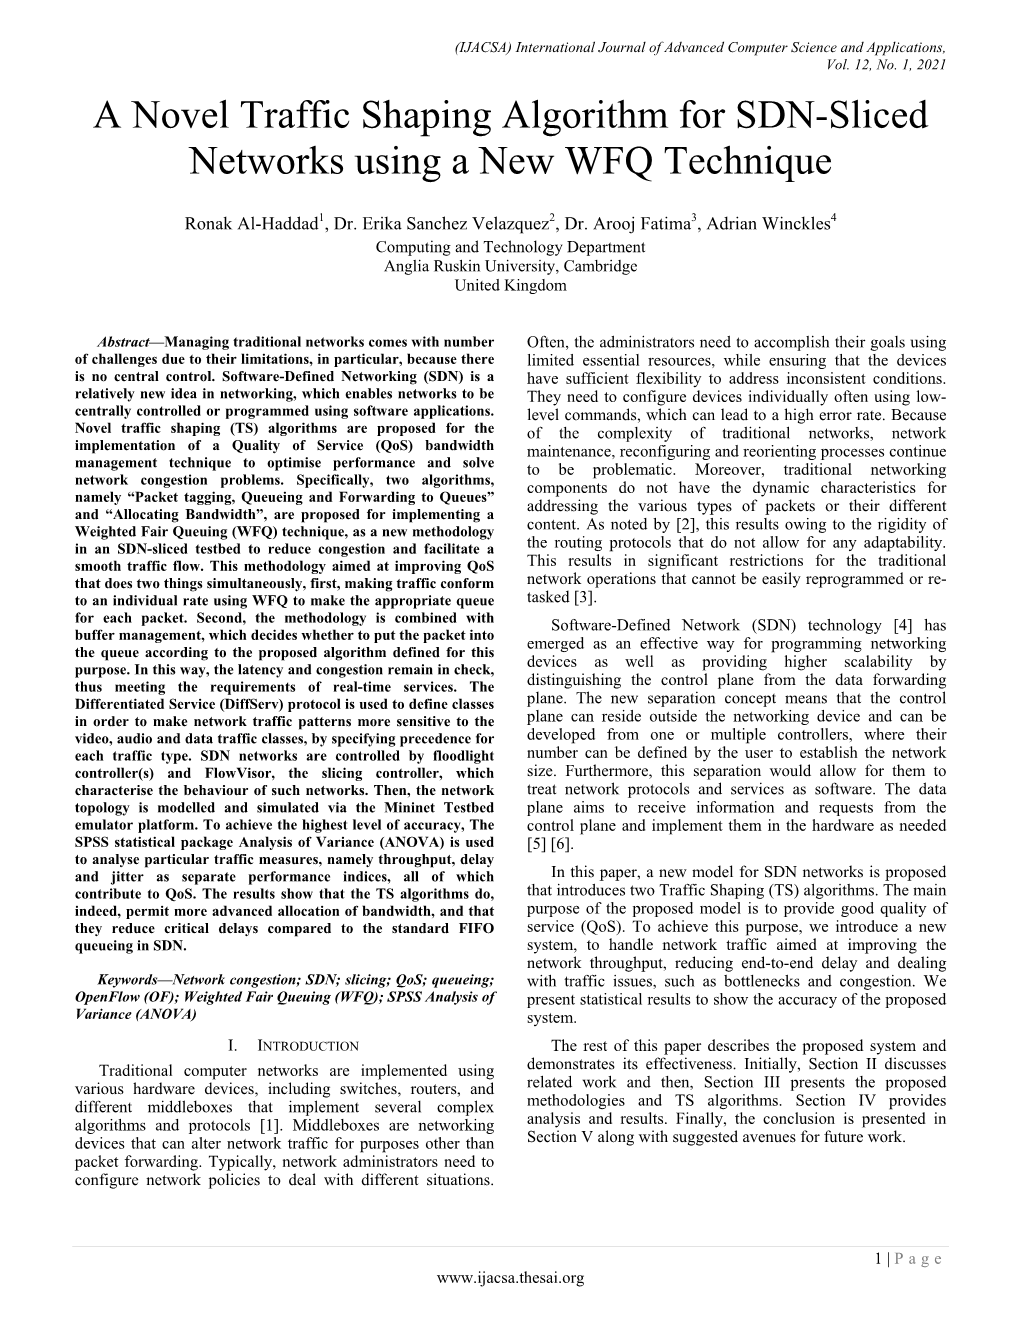 A Novel Traffic Shaping Algorithm for SDN-Sliced Networks Using a New WFQ Technique